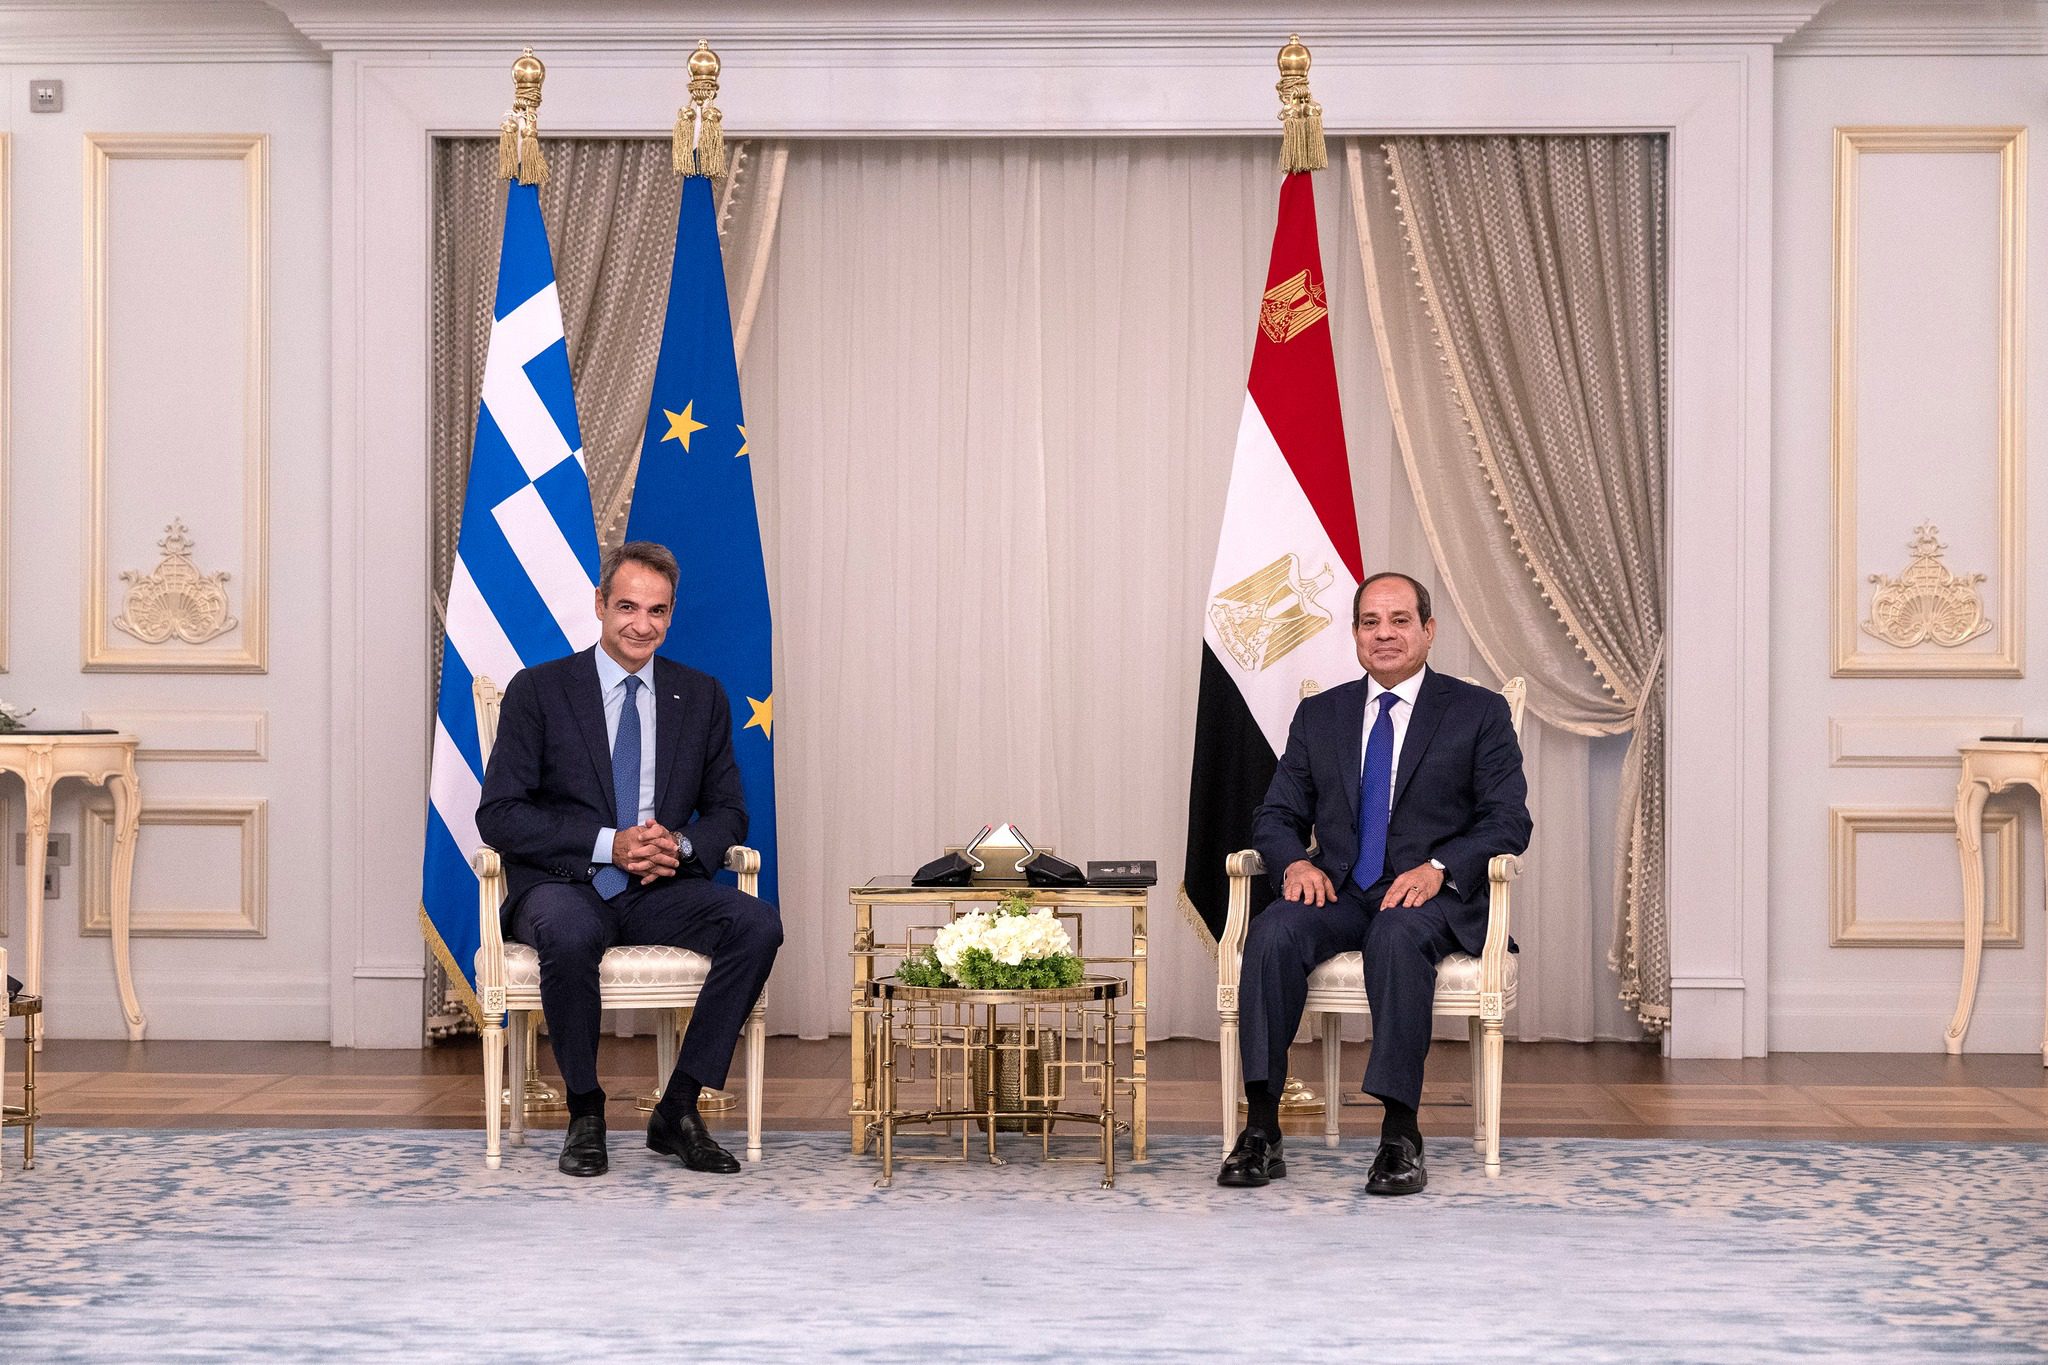 Greek Prime Minister visit LNG ally Egypt to discuss energy links